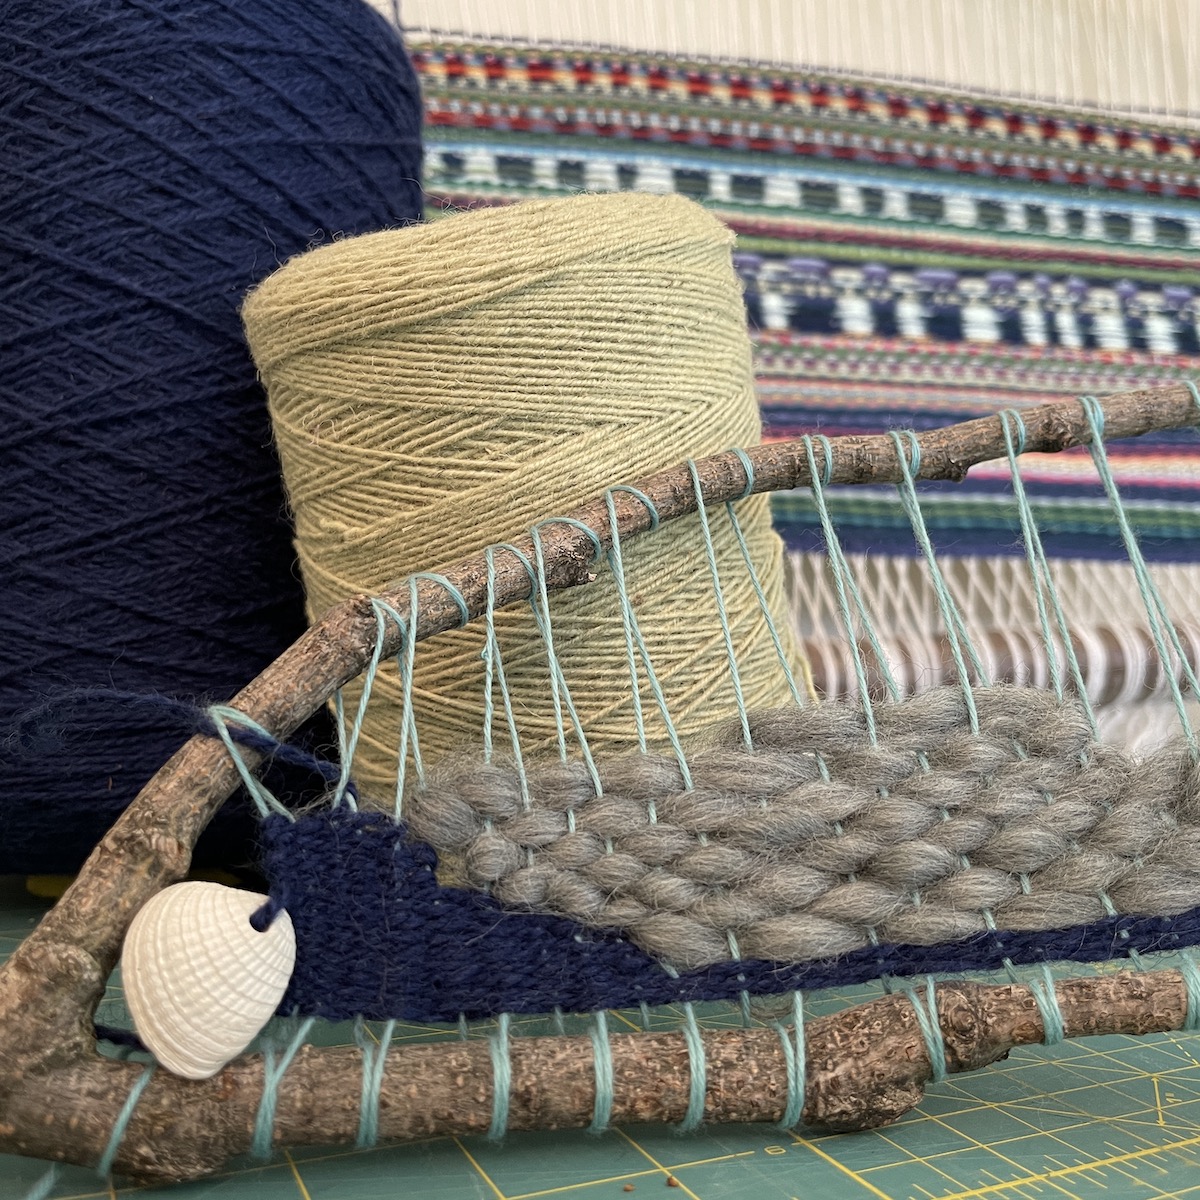 Weaving as Storytelling and Memory Mapping